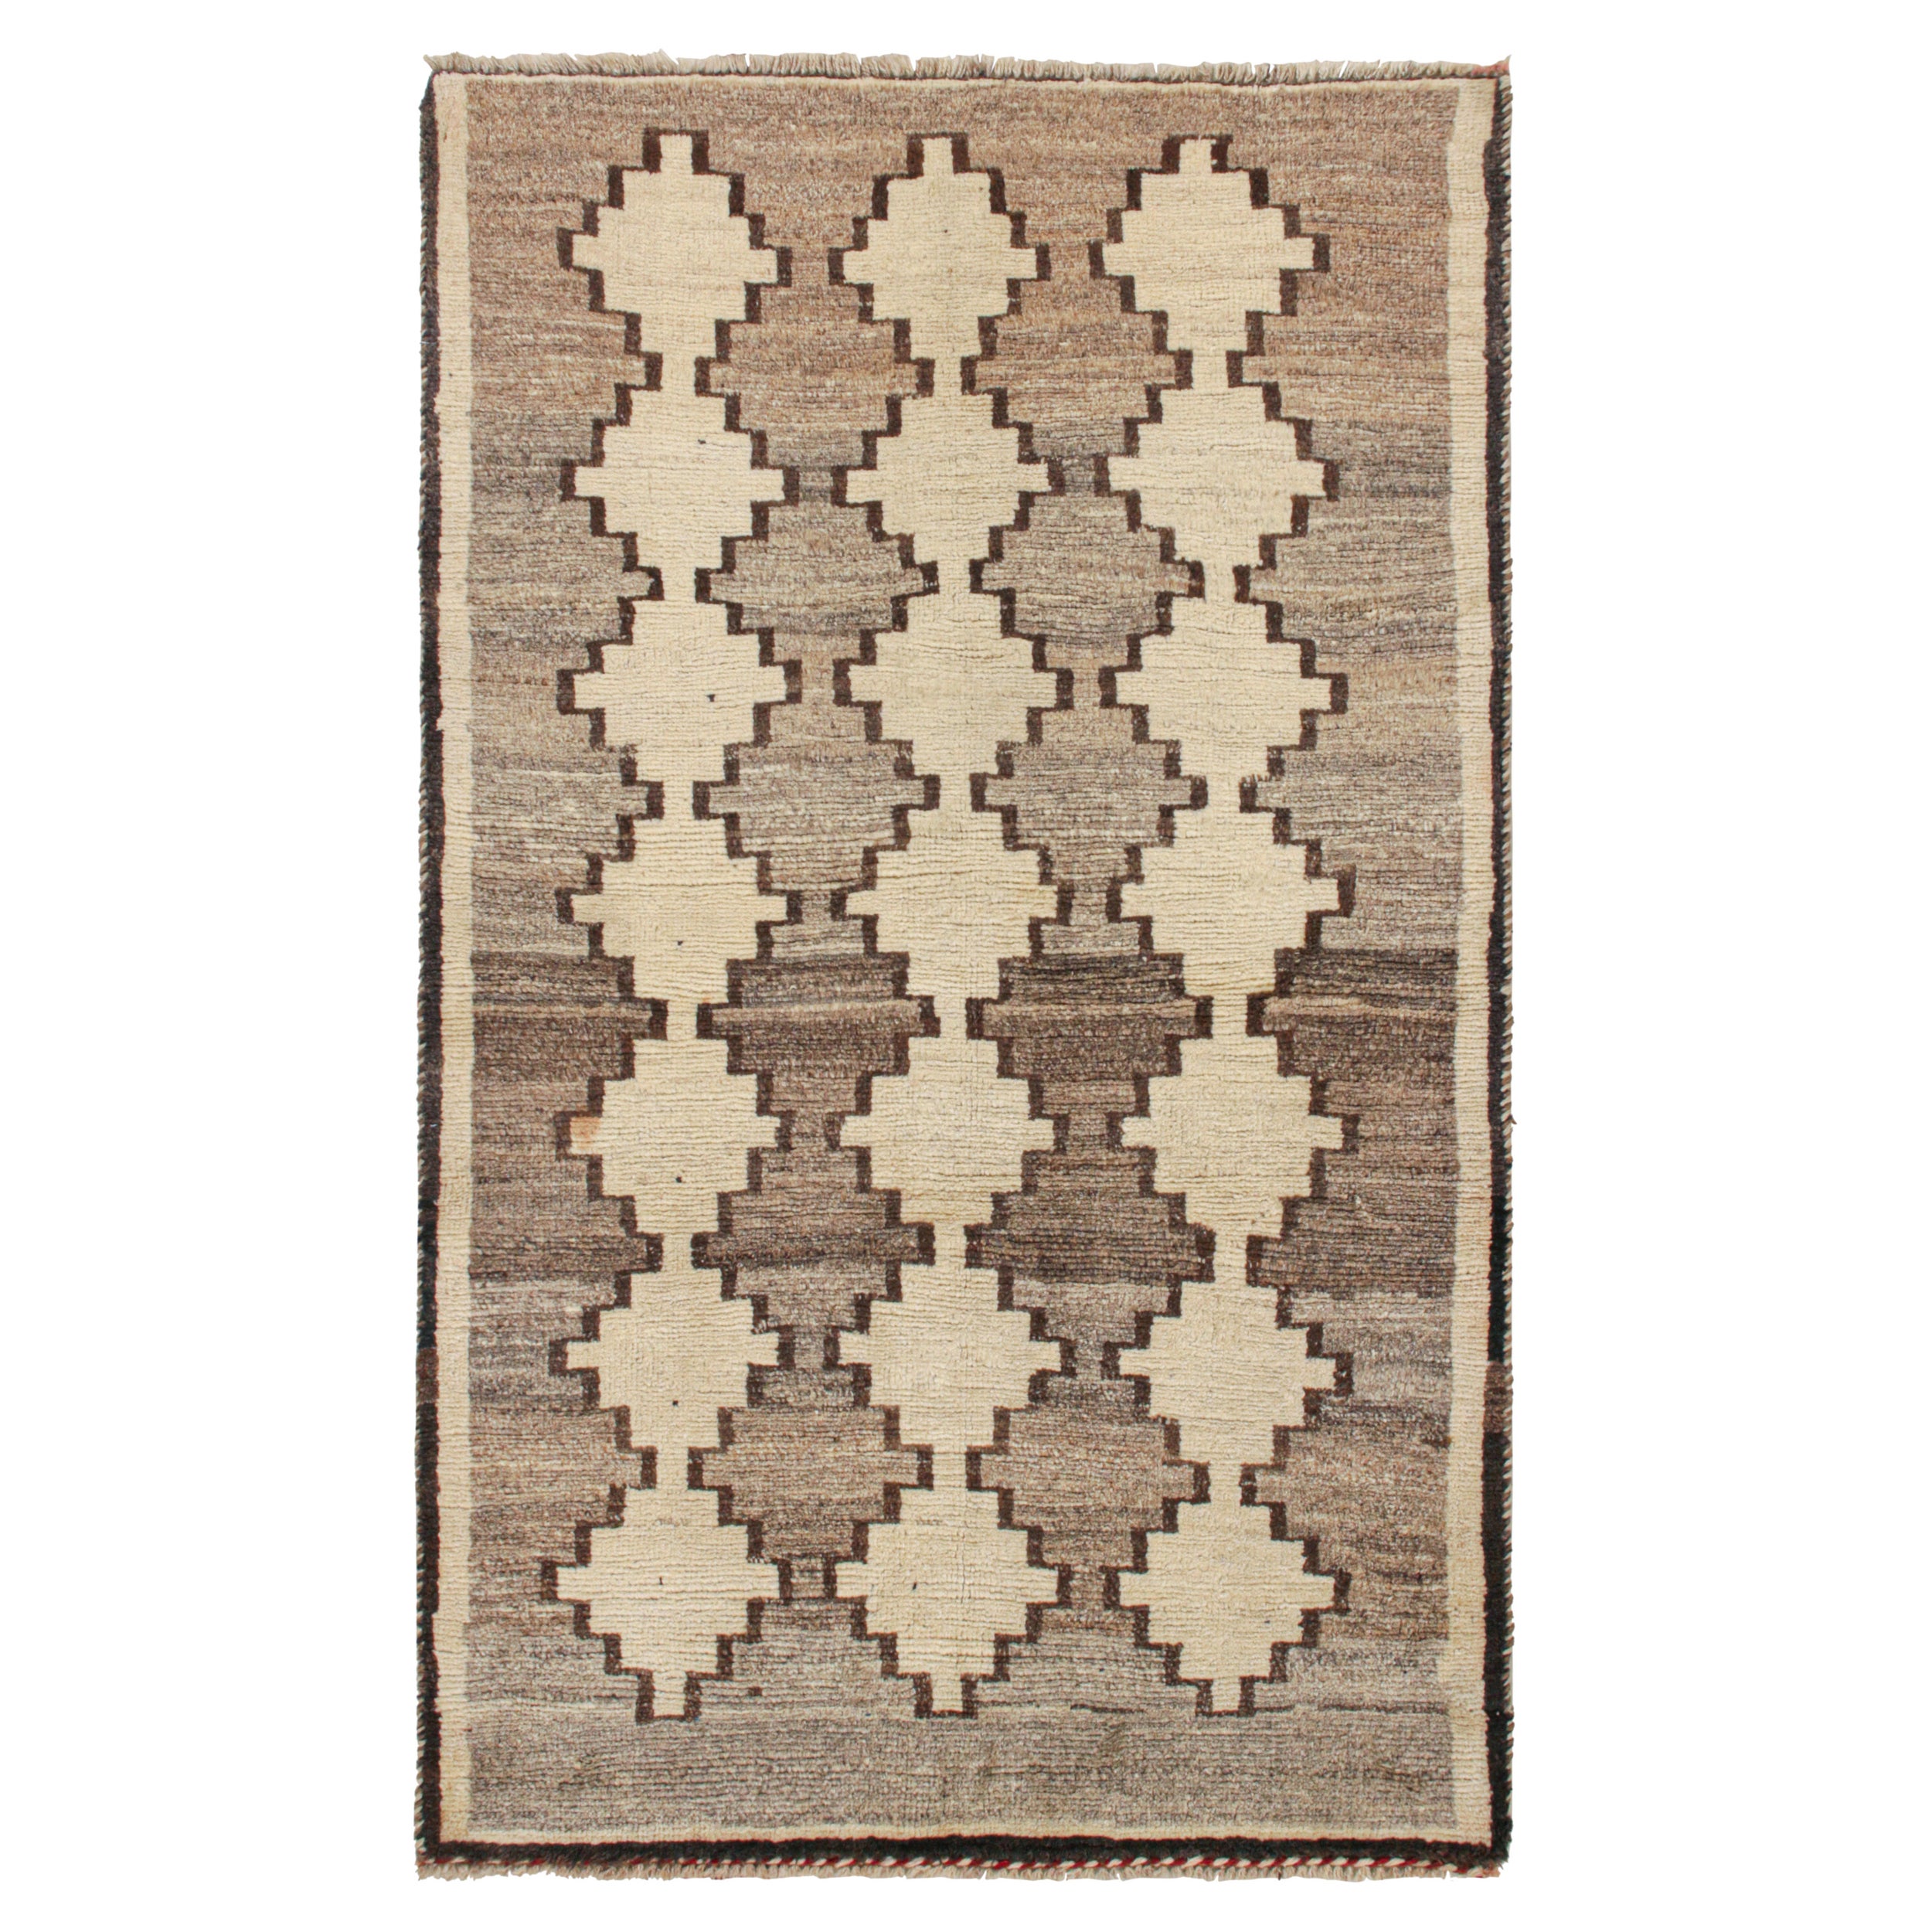 Vintage Persian Tribal Rug in Beige with Geometric Patterns For Sale